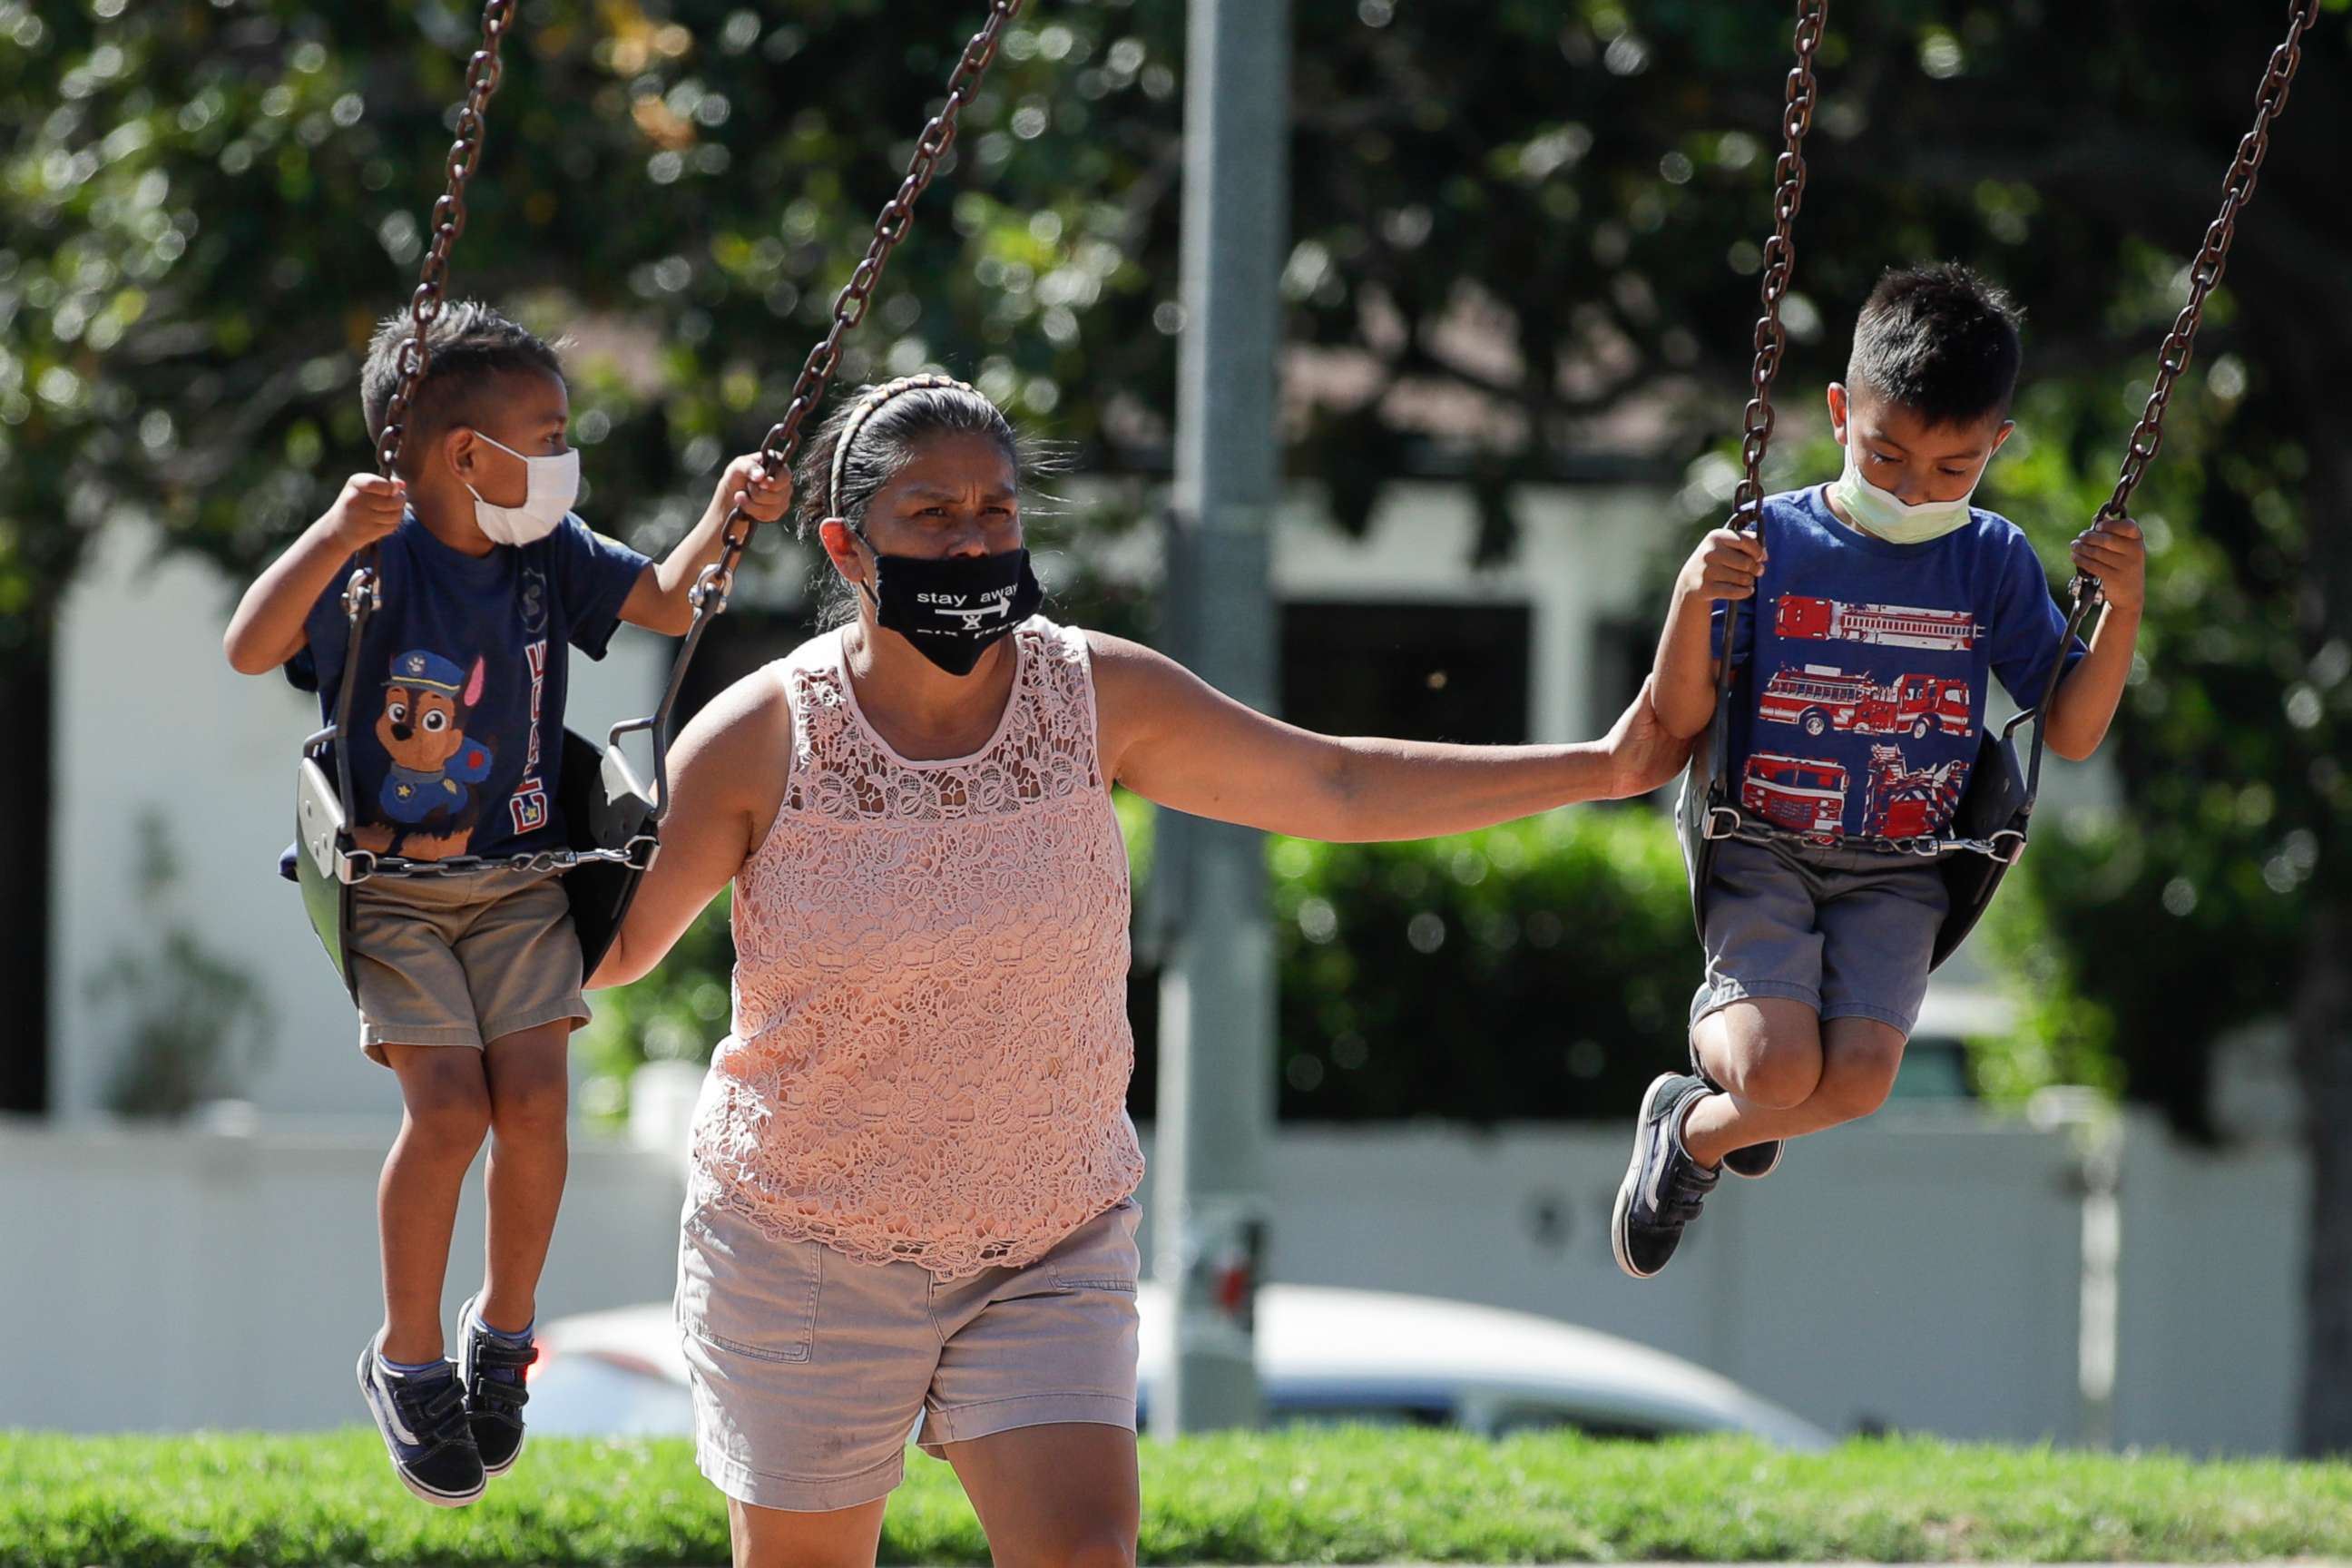 PHOTO: A woman and two children wear masks at a playground, July 11, 2020, in Los Angeles.